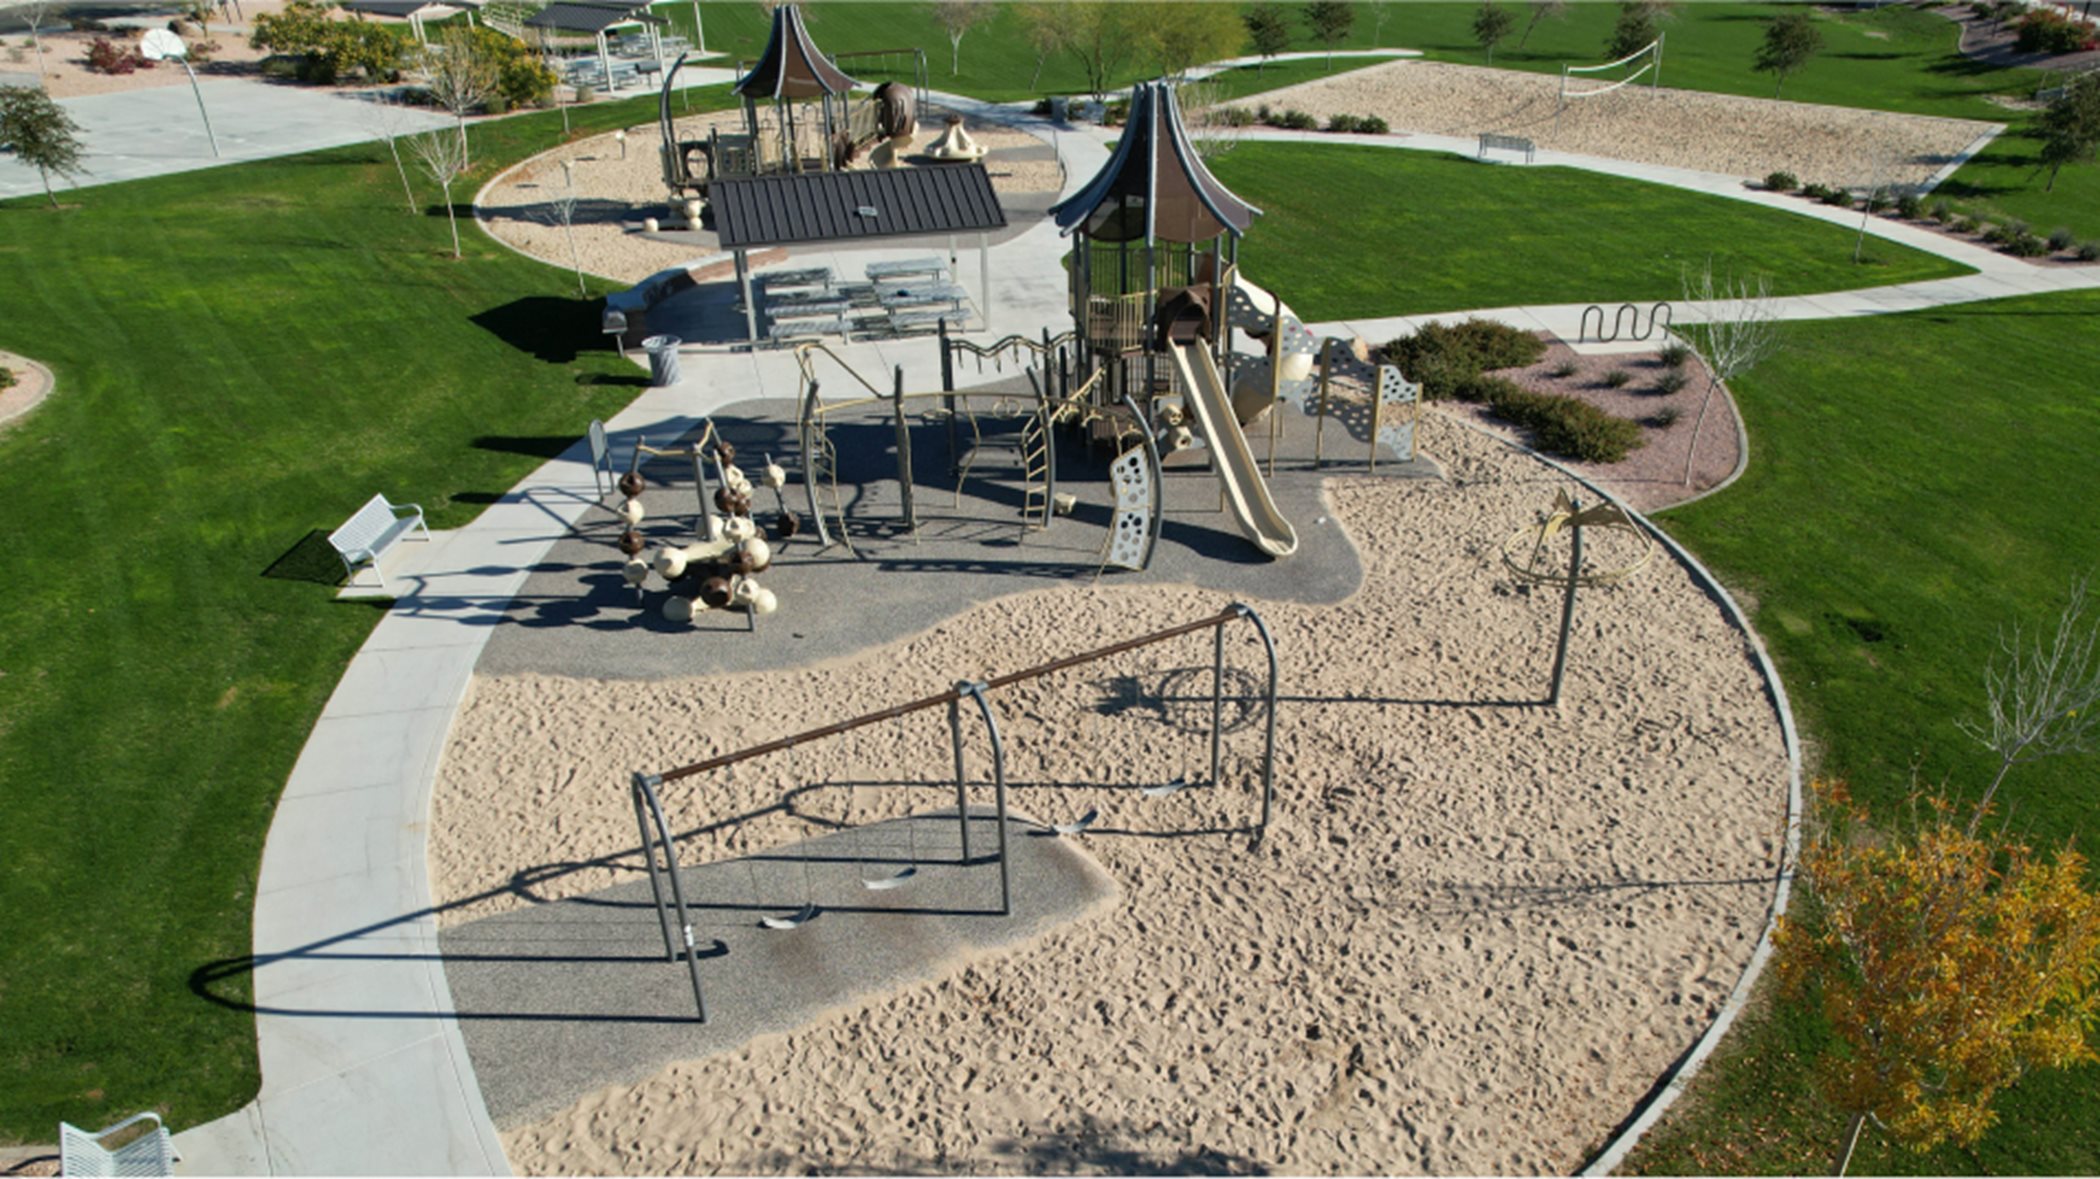 Playground at the park